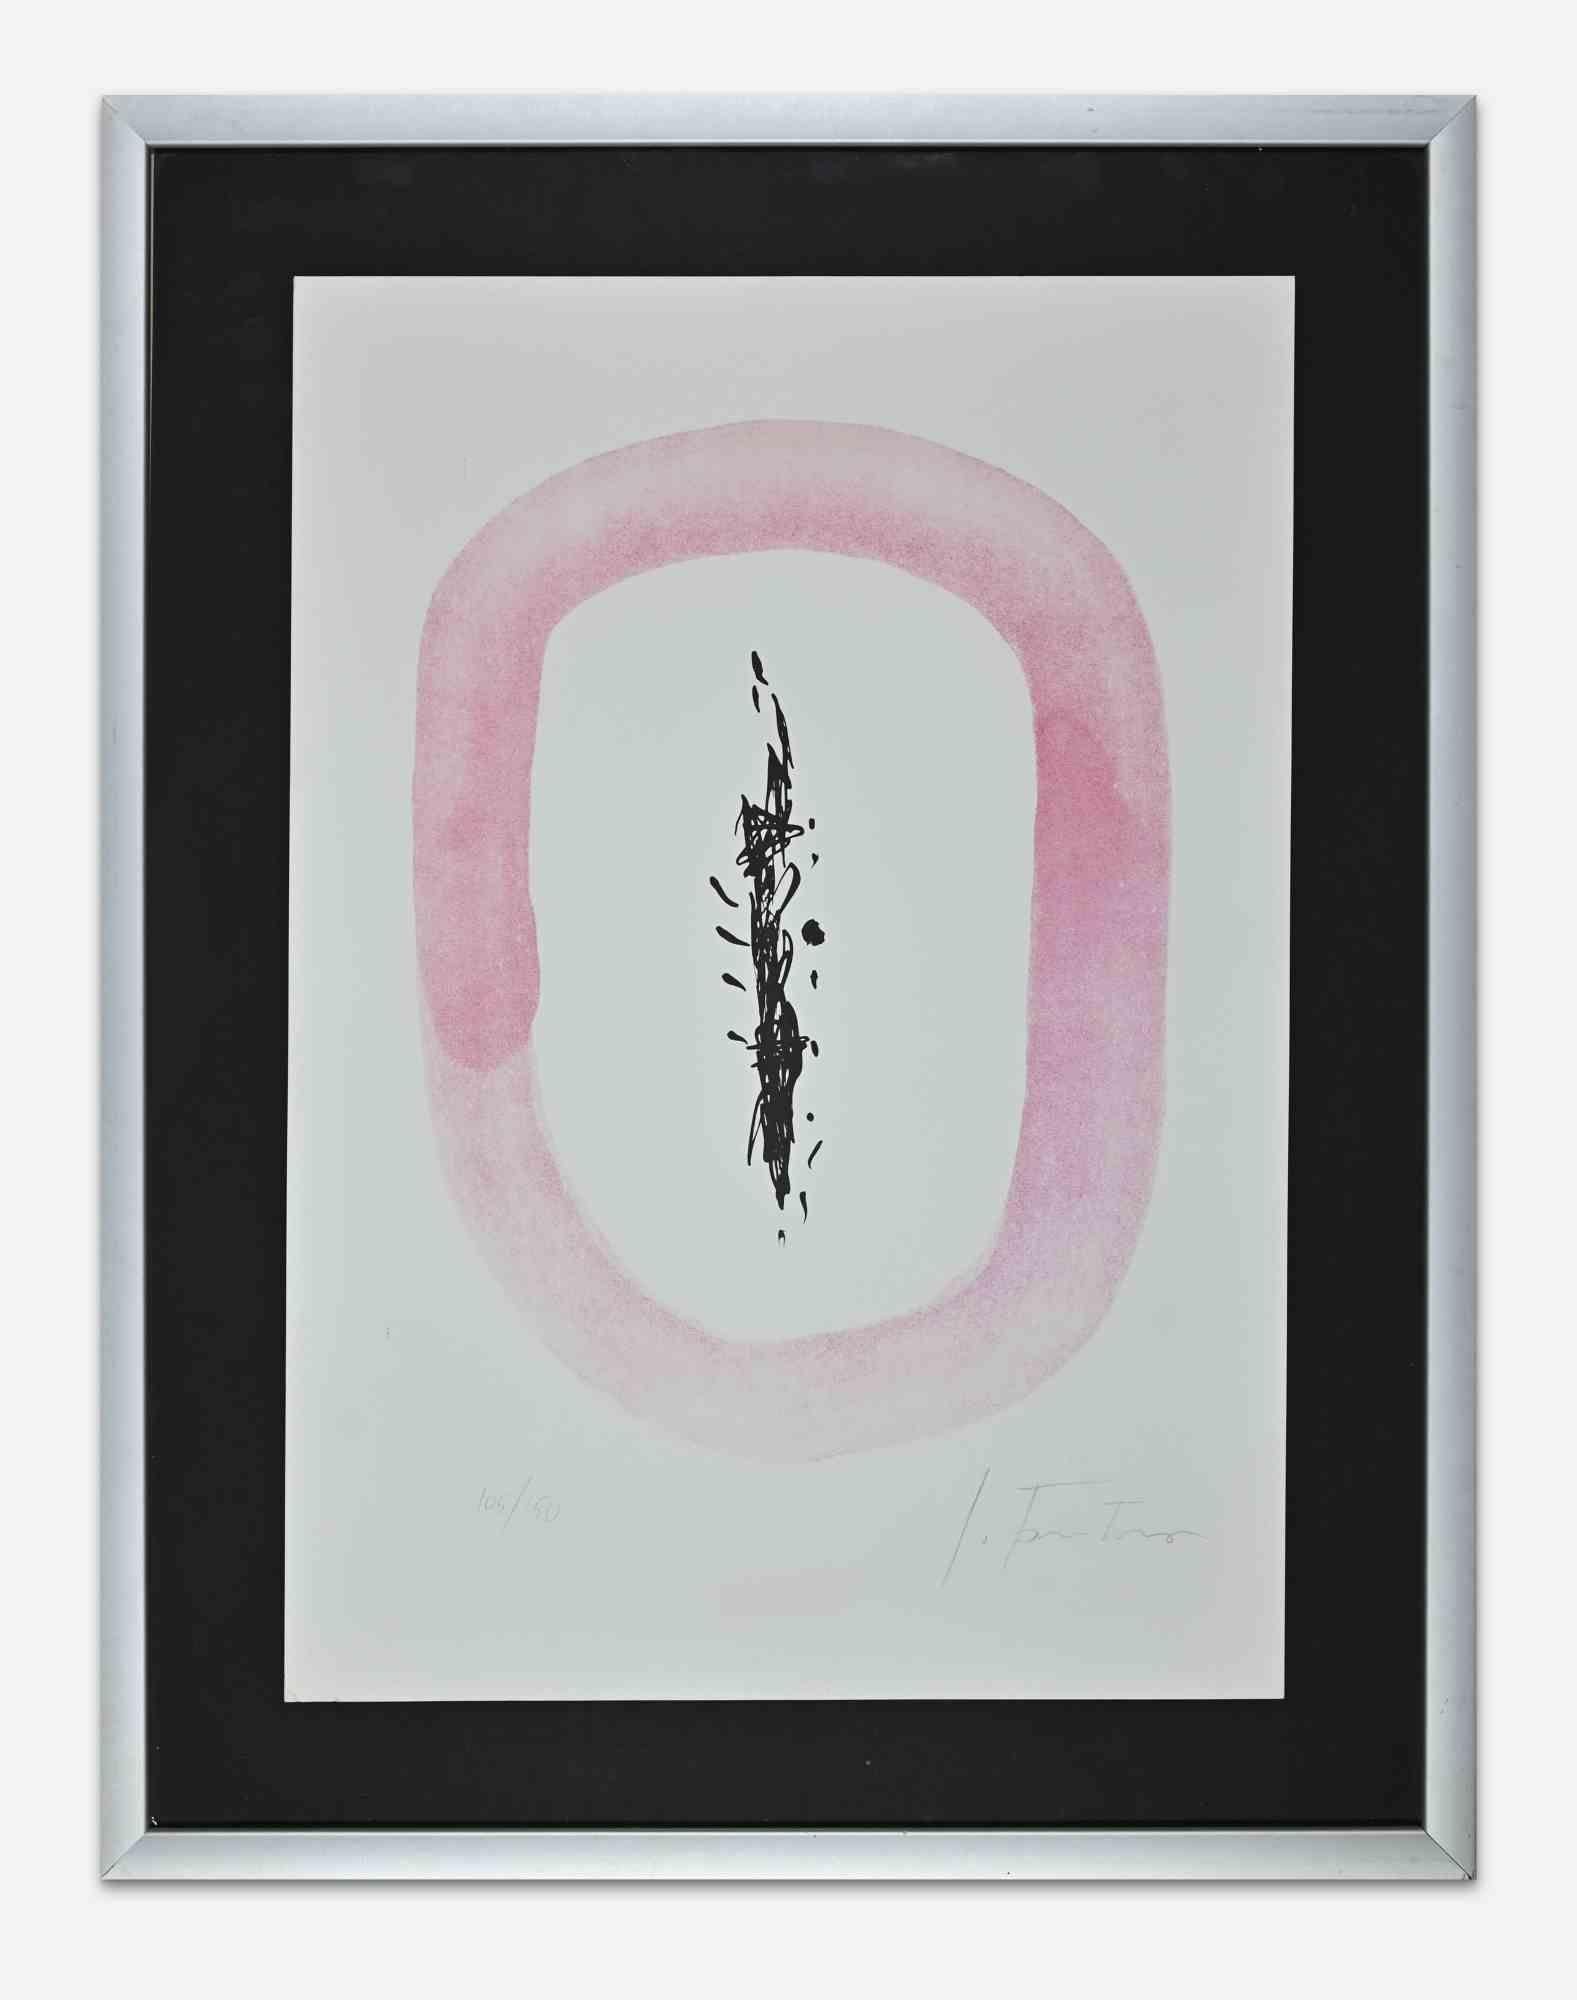 Untitled - Photolithograph by Lucio Fontana - 1963